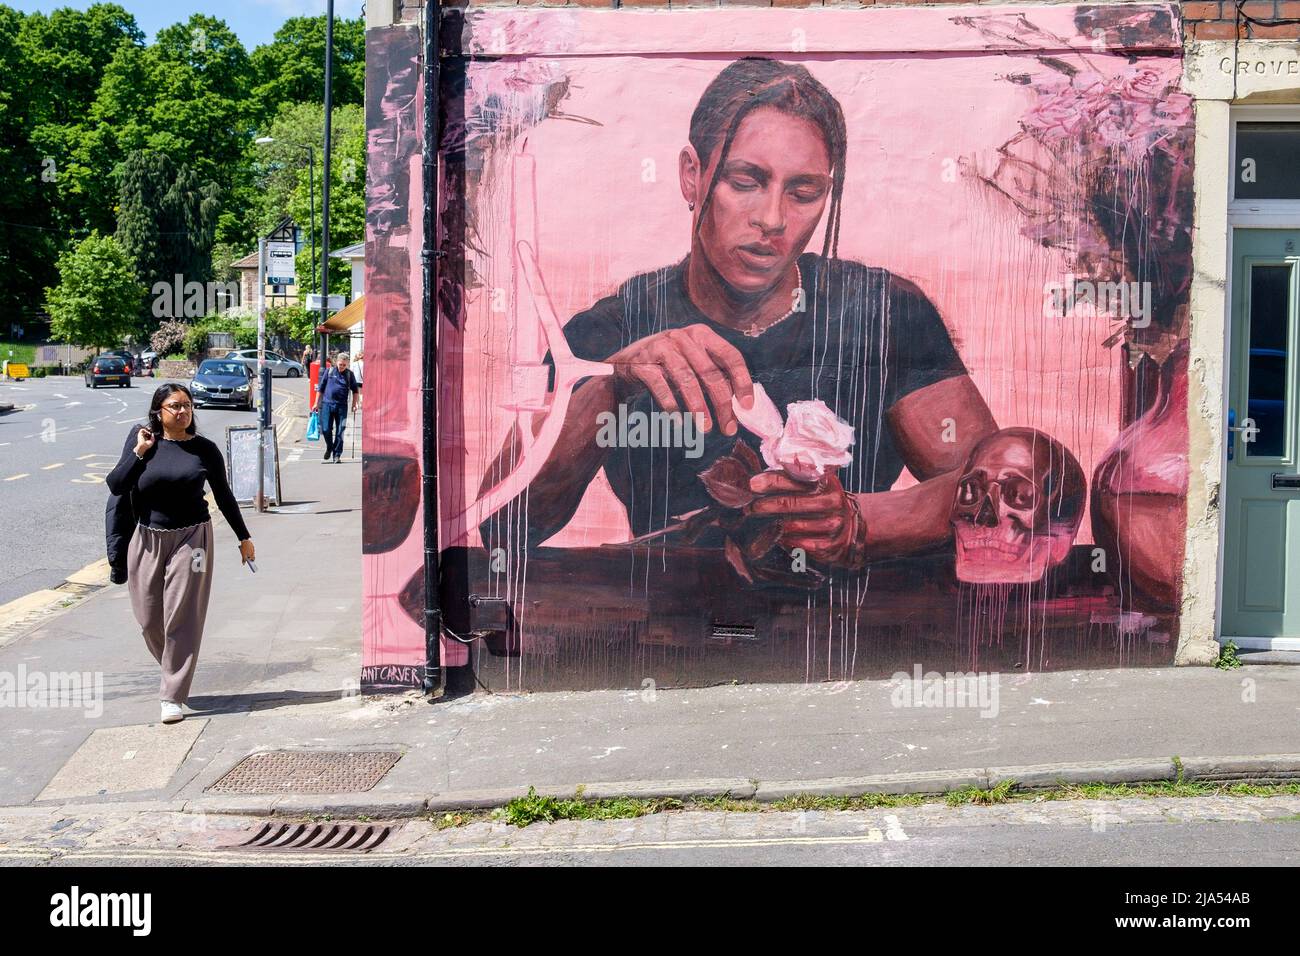 Bristol, UK. 27th May, 2022. Artwork created by London artist Ant Carver for the Upfest 2022 festival,Europe's largest Street Art & Graffiti festival is pictured on the streets Bedminster, Bristol. Credit: Lynchpics/Alamy Live News Stock Photo